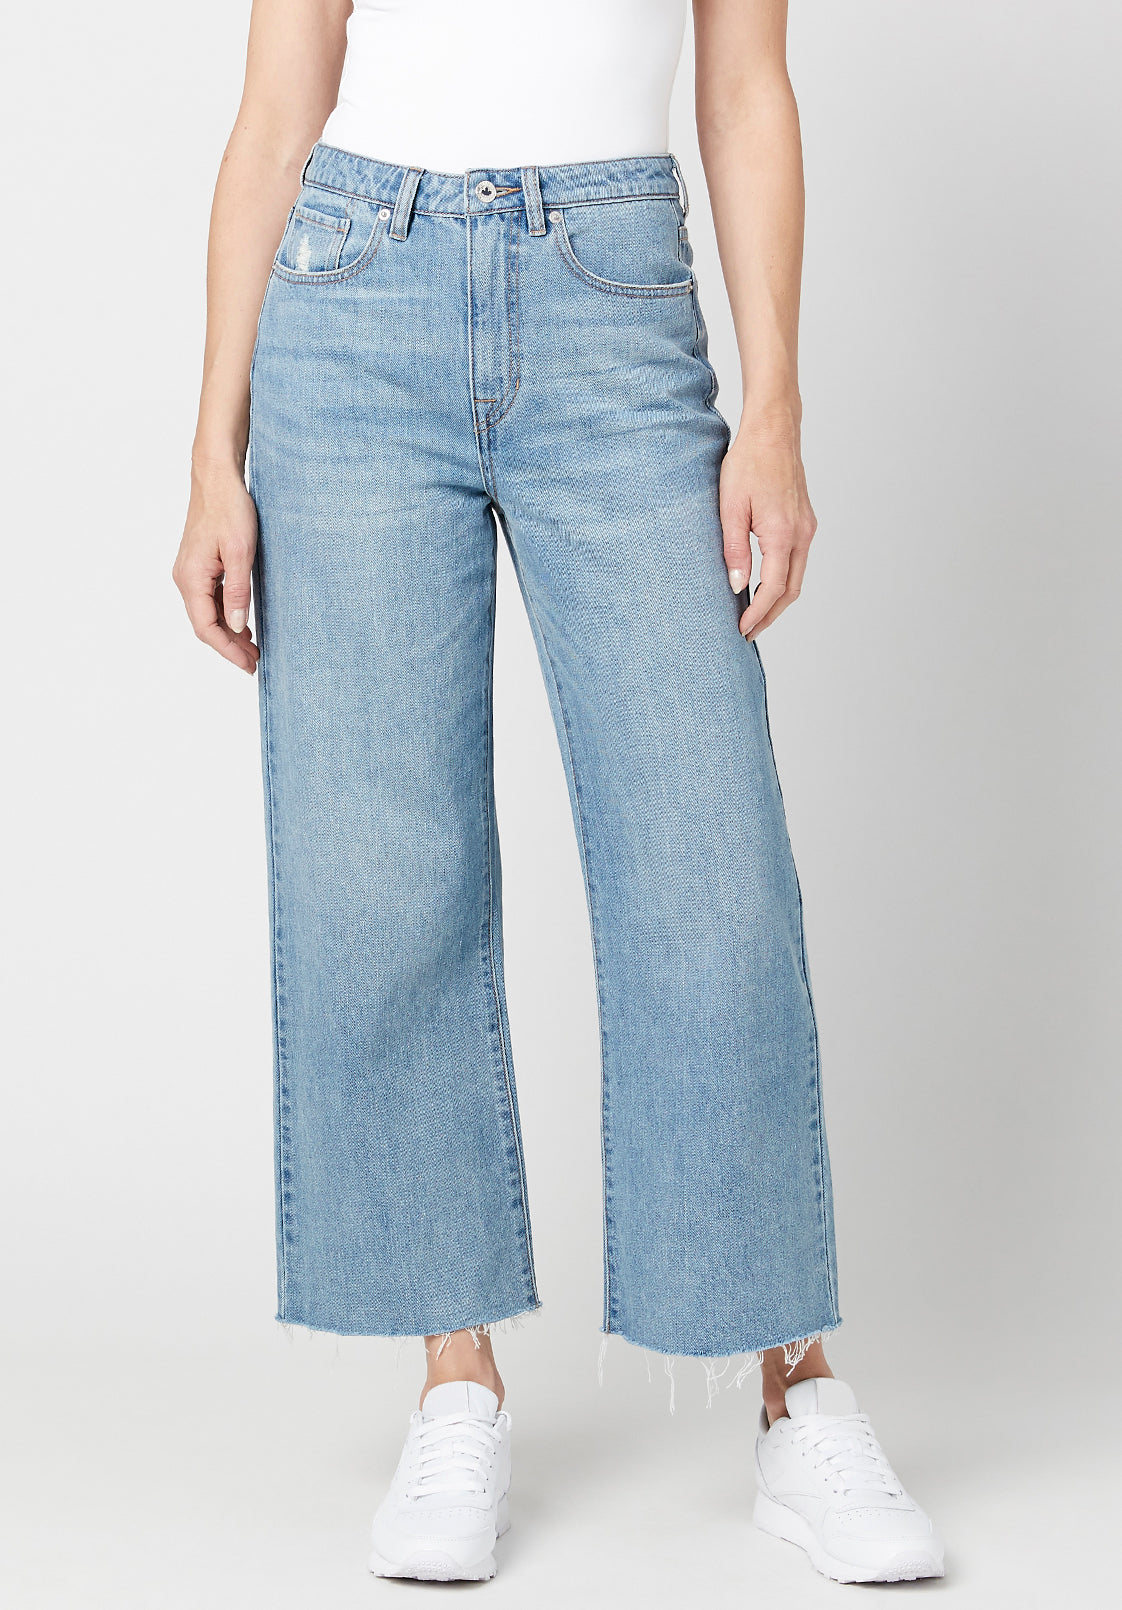 Wide Leg Addisson Women's Cropped Jeans in Antique Whiskered Light Blue -  BL15859